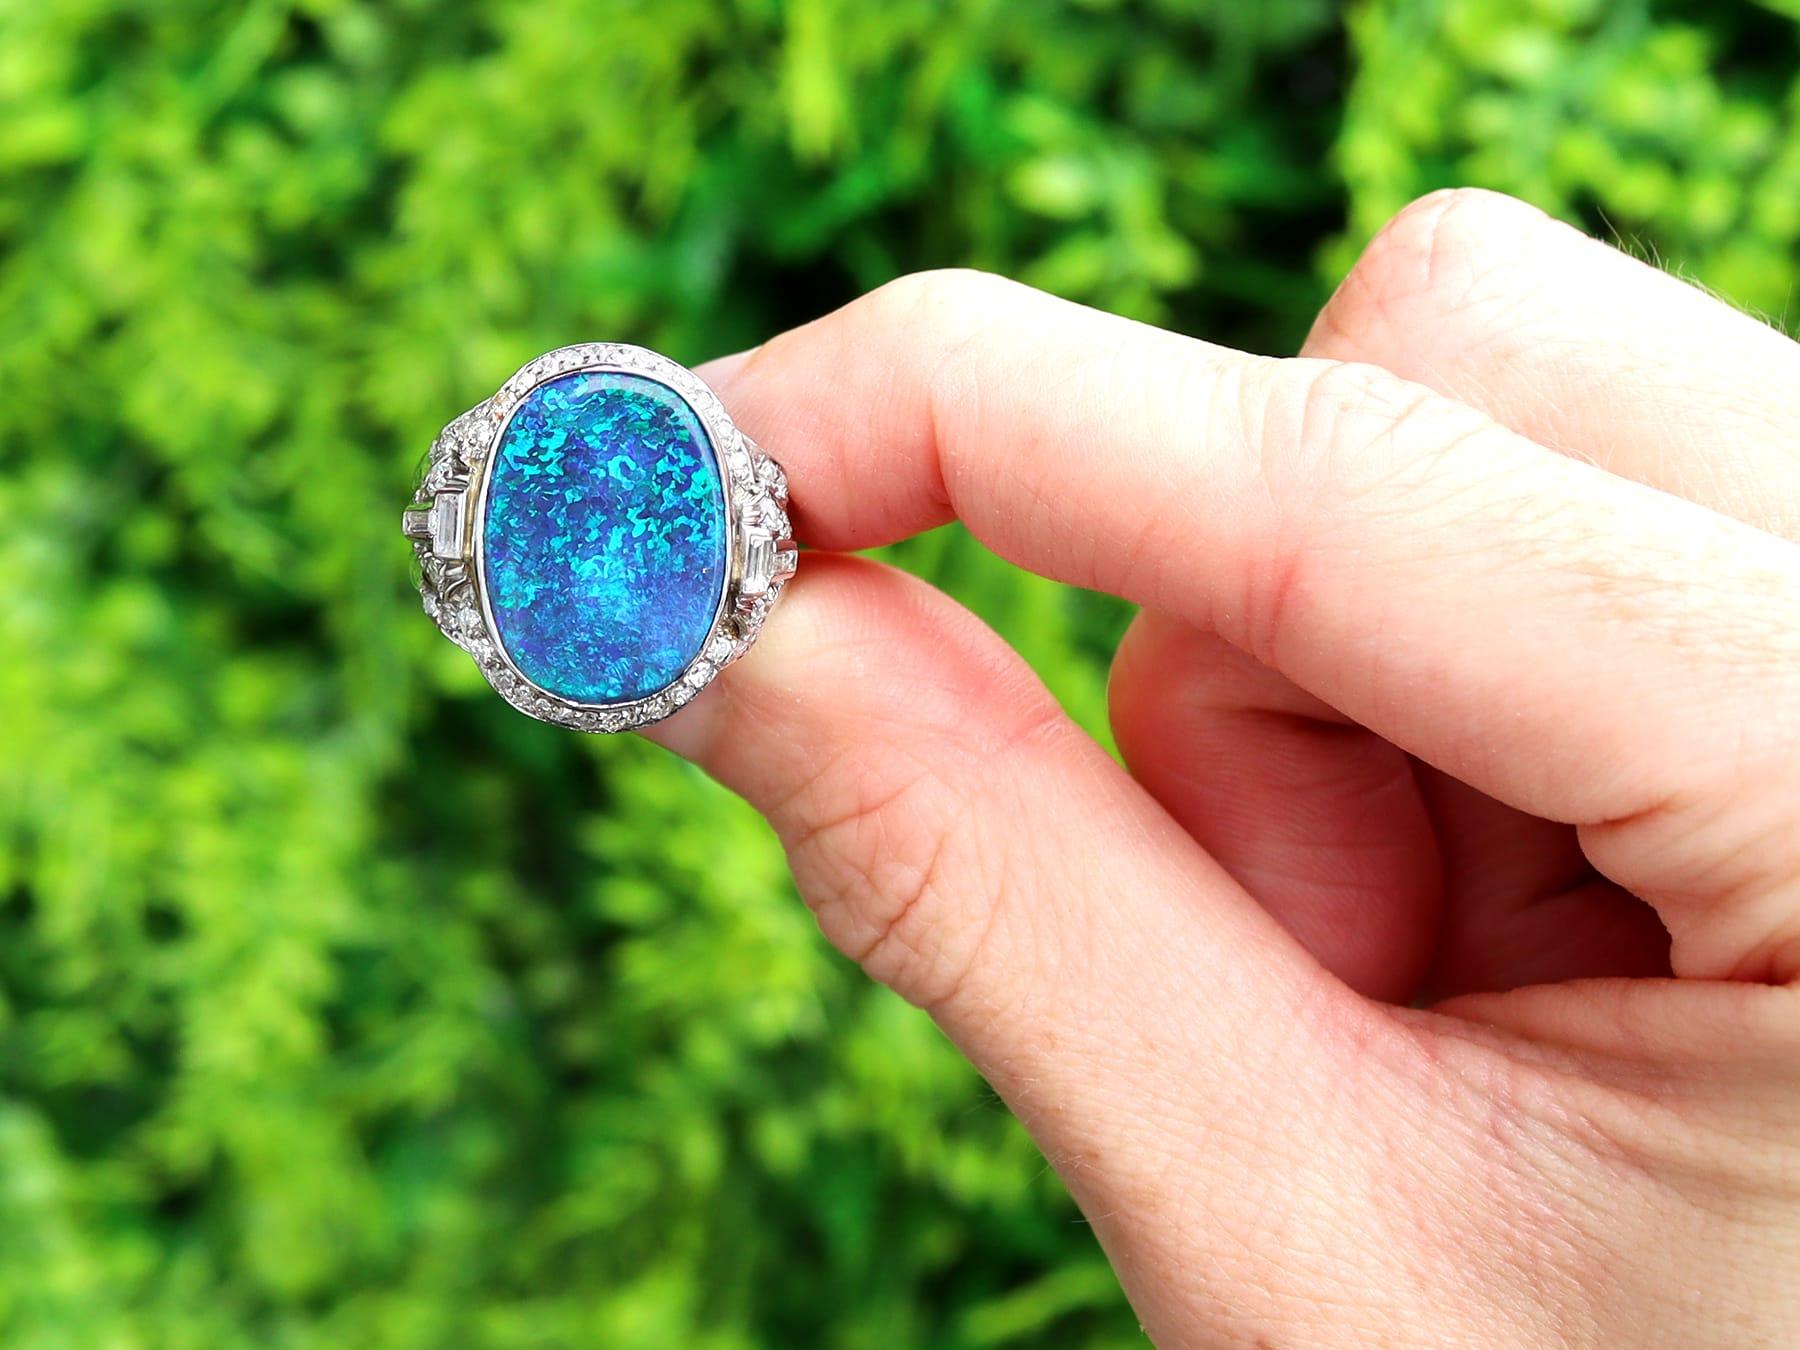 A stunning antique 1930s 3.83 Ct black opal and 1.15 Ct diamond, platinum cocktail ring; part of our diverse antique jewelry and estate jewelry collections.

This stunning, fine and impressive black opal ring with diamond has been crafted in